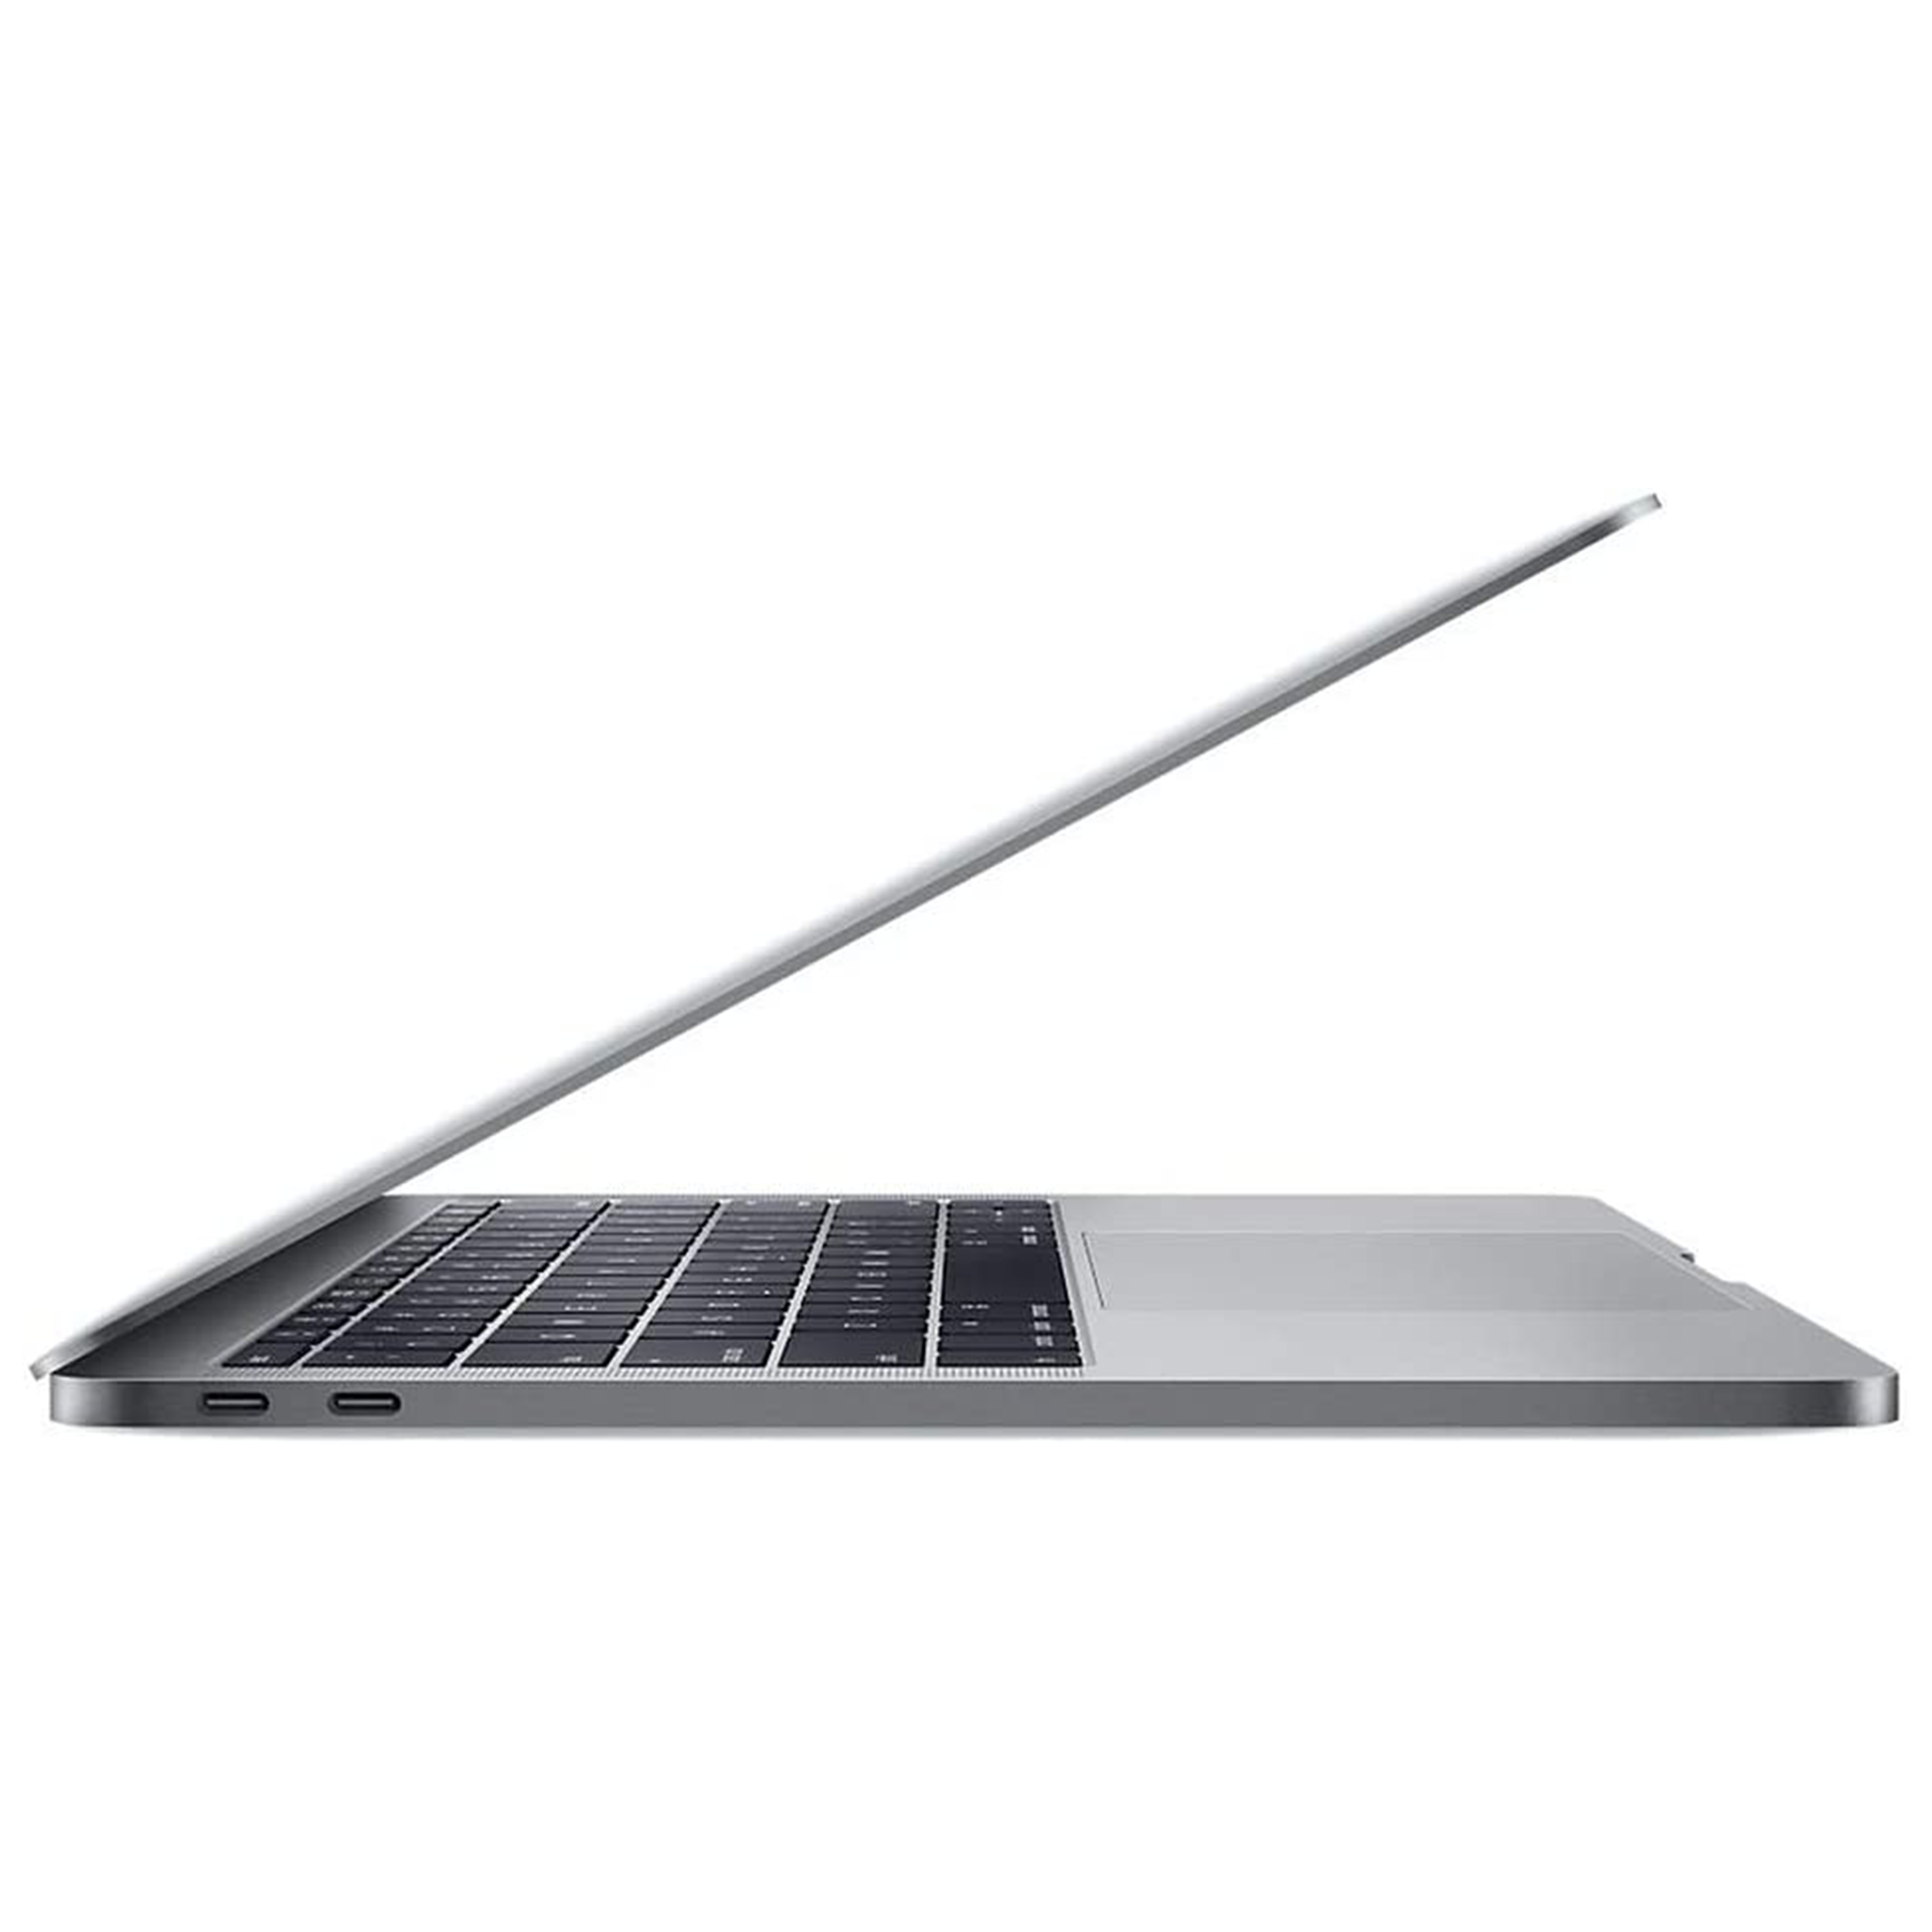 Apple MacBook Pro 2.3GHz i5 (13.3-inch, 2017, Two Thunderbolt 3 ports)